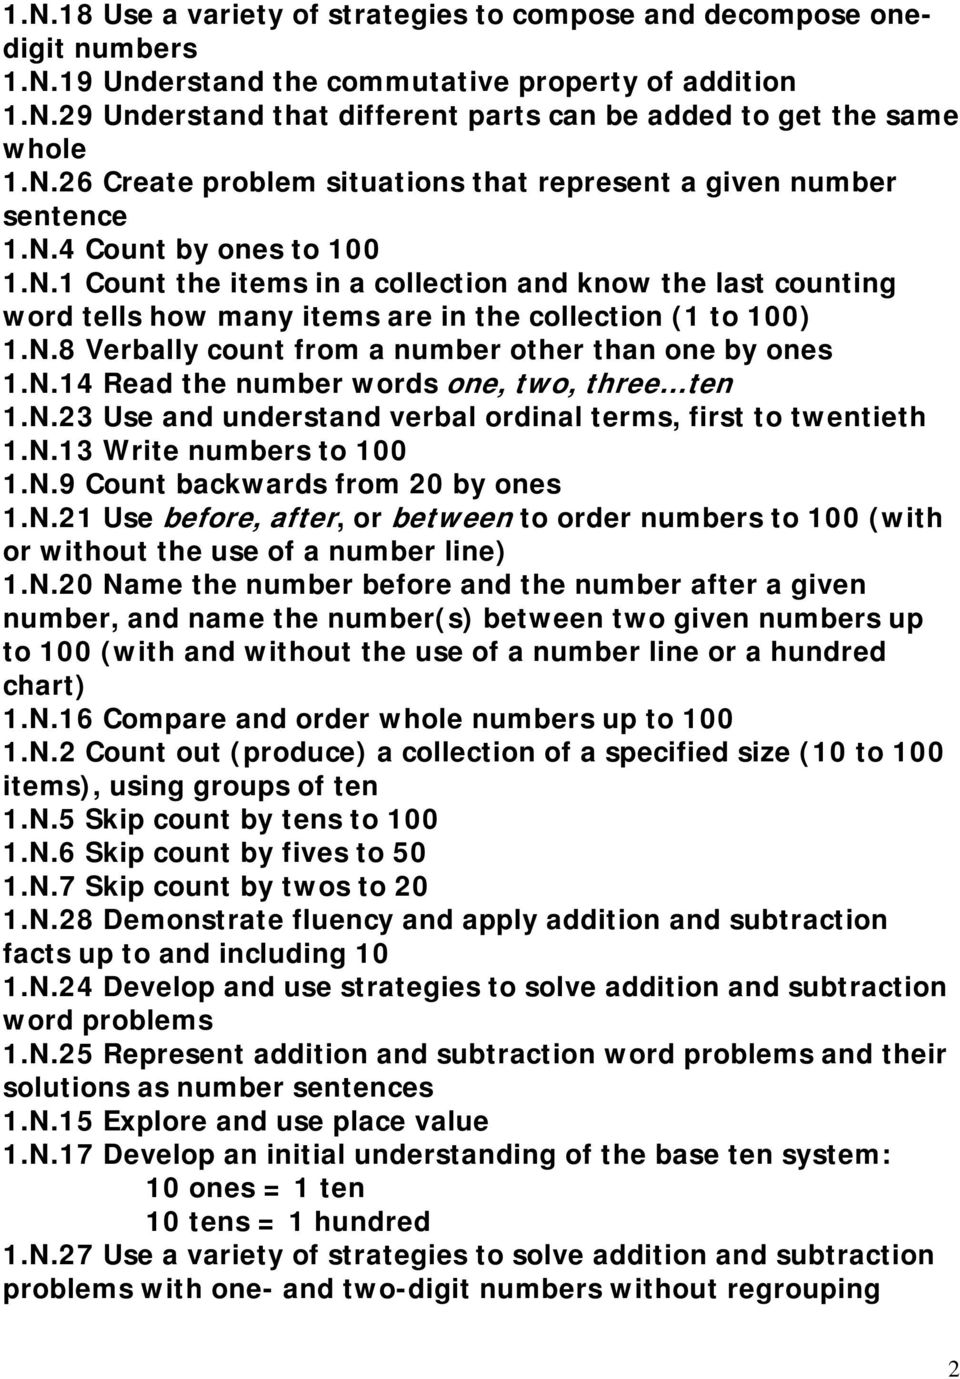 N.8 Verbally count from a number other than one by ones 1.N.14 Read the number words one, two, three ten 1.N.23 Use and understand verbal ordinal terms, first to twentieth 1.N.13 Write numbers to 100 1.